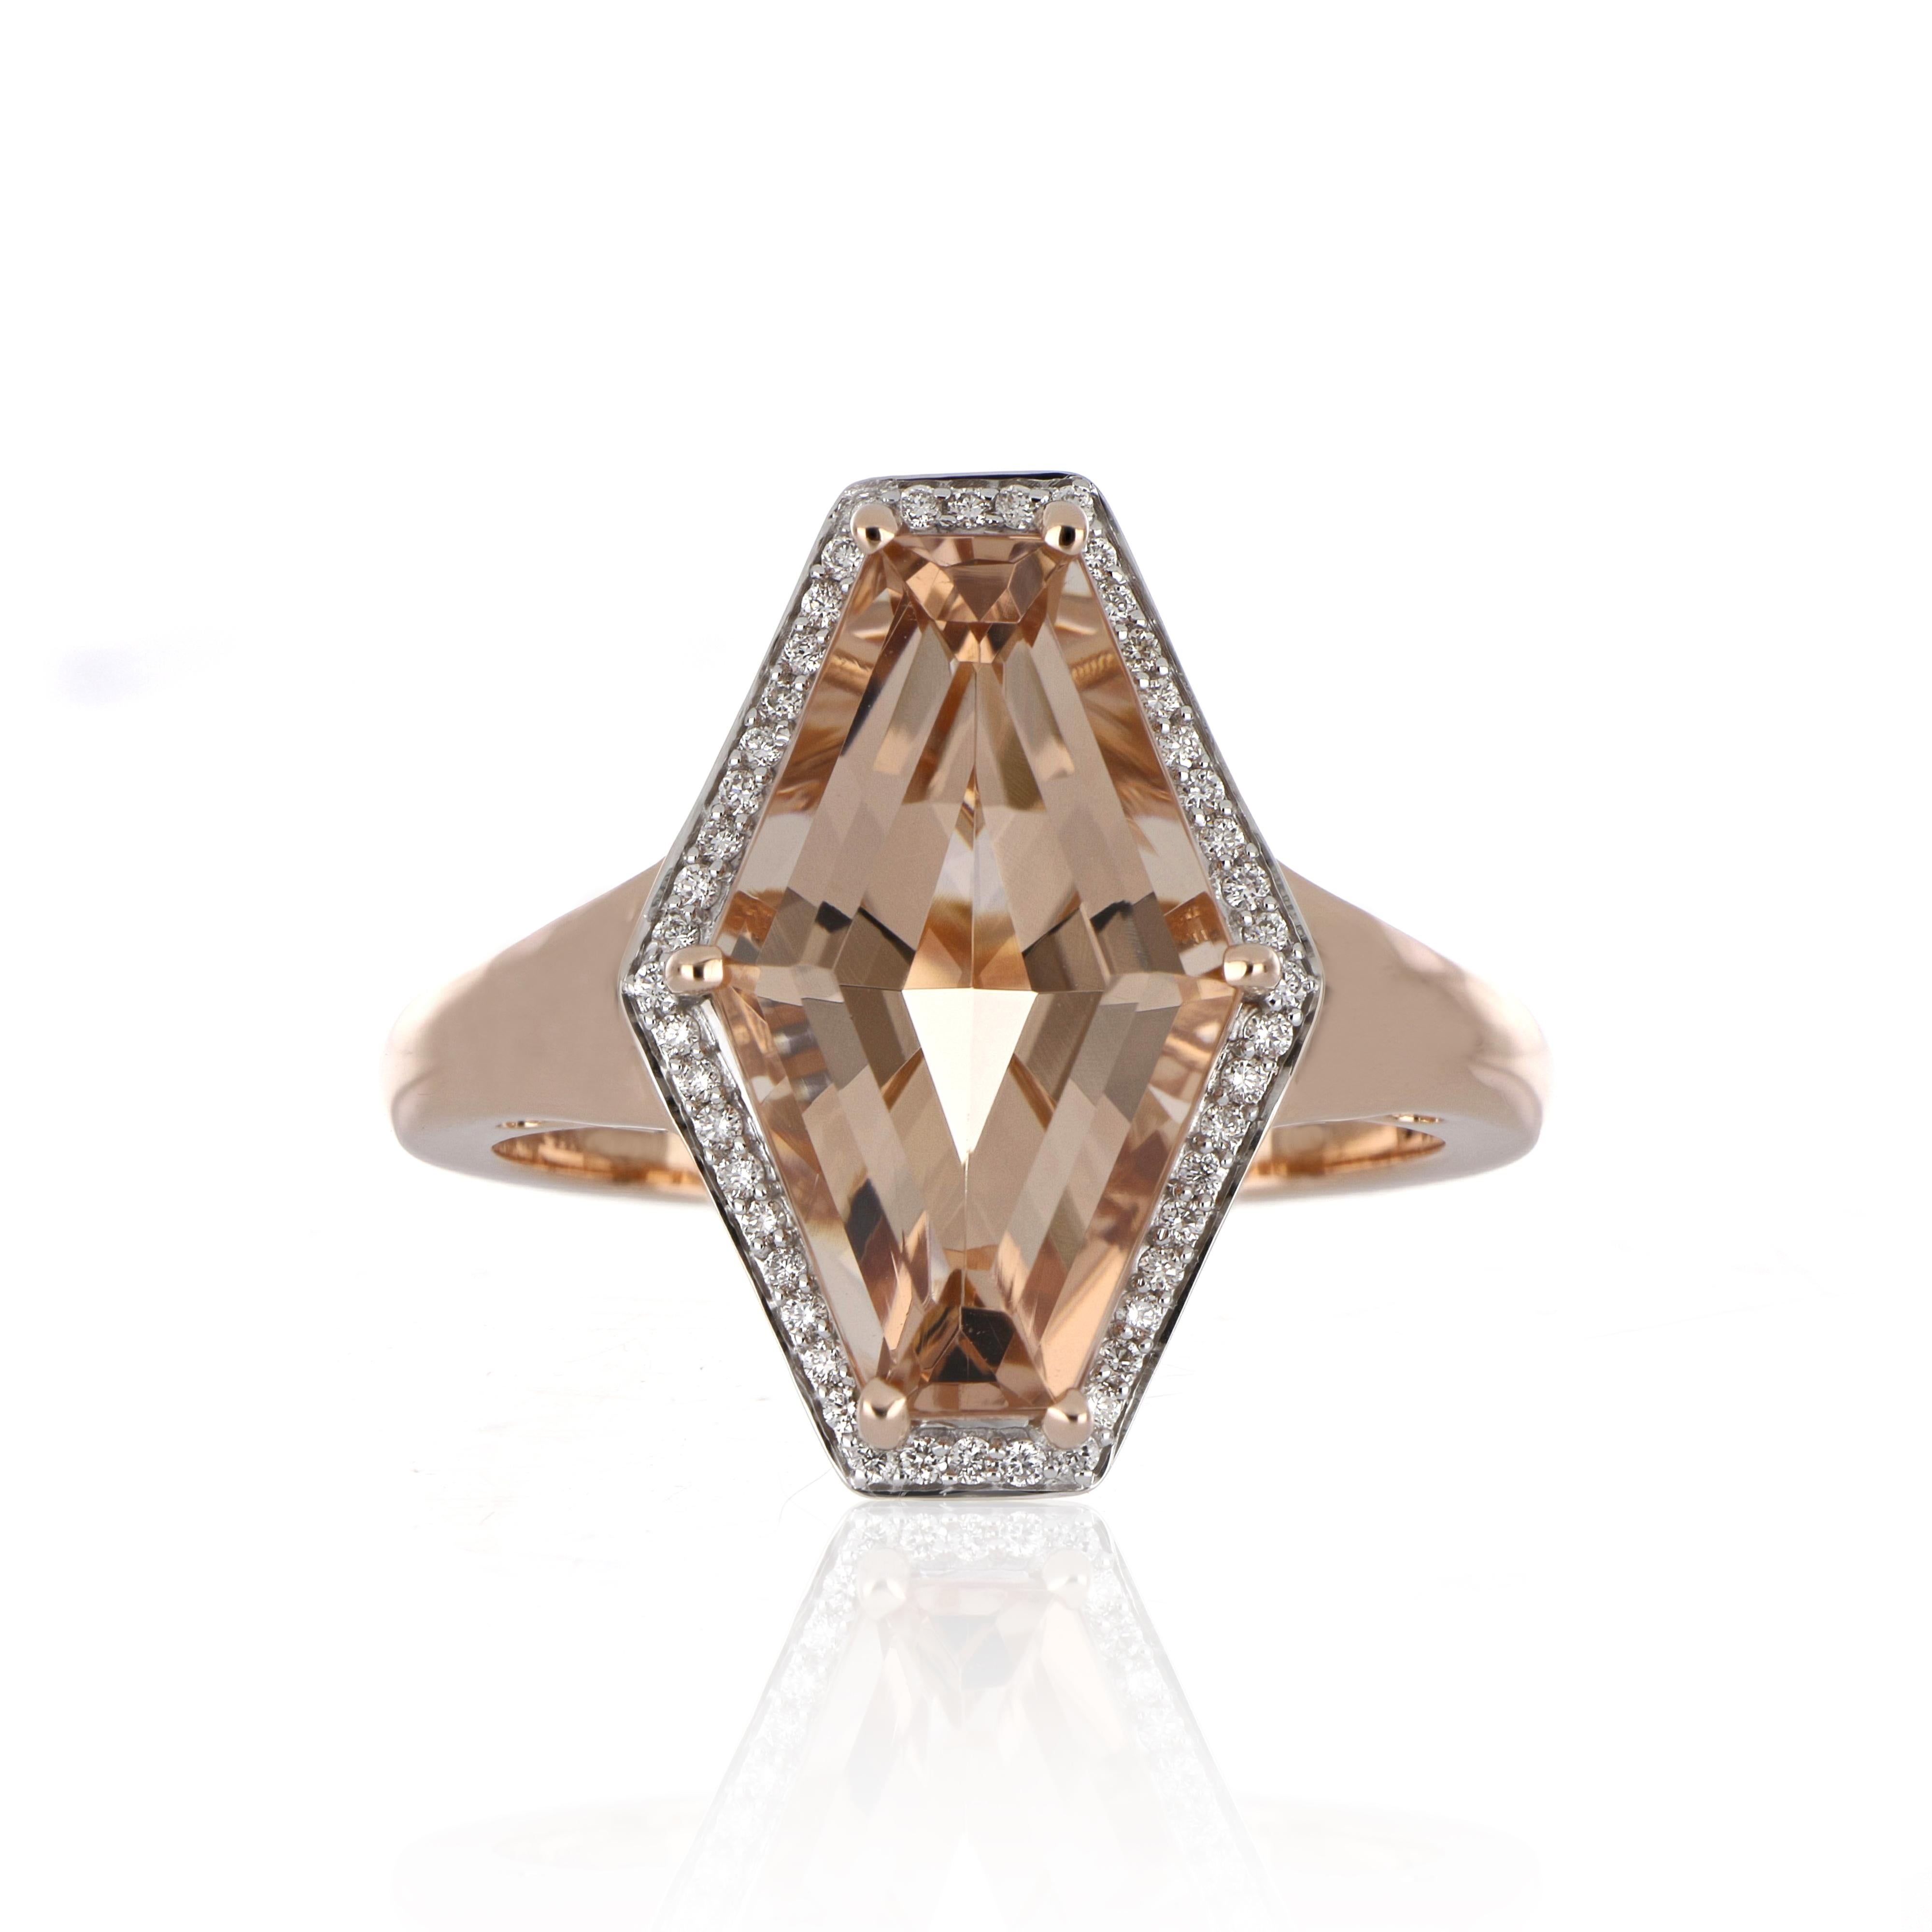 Elegant and exquisitely detailed Cocktail 14K Ring, centre set with 5.13 Cts. Fancy Hexagon Cut Morganite. Surrounded with Diamonds, weighing approx. 0.12 ct. Beautifully Hand crafted in 14 Karat Rose Gold.

Stone Size:
Morganite: 16 x 10